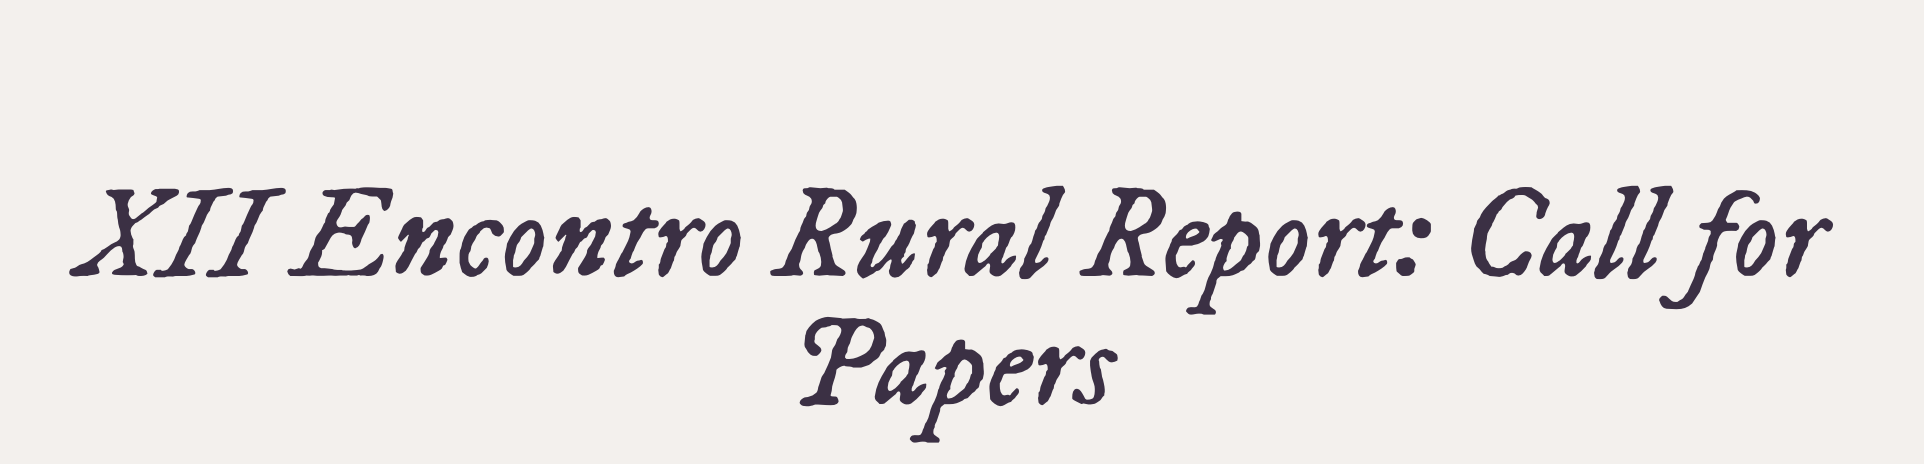 Call for papers: XII Encontro Rural Report